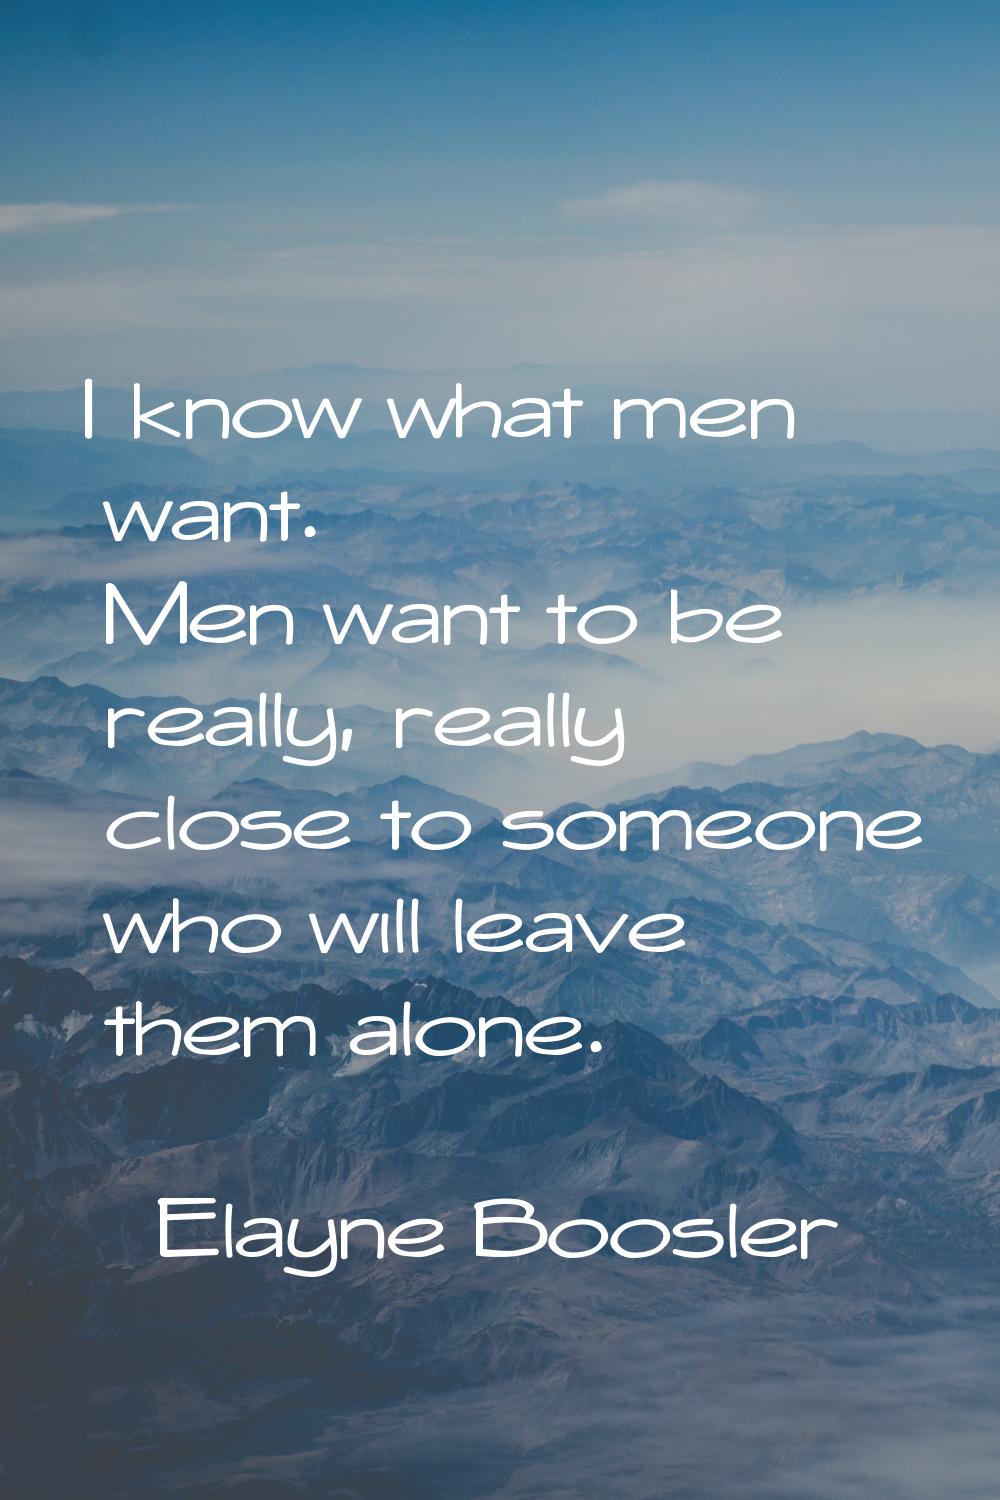 I know what men want. Men want to be really, really close to someone who will leave them alone.